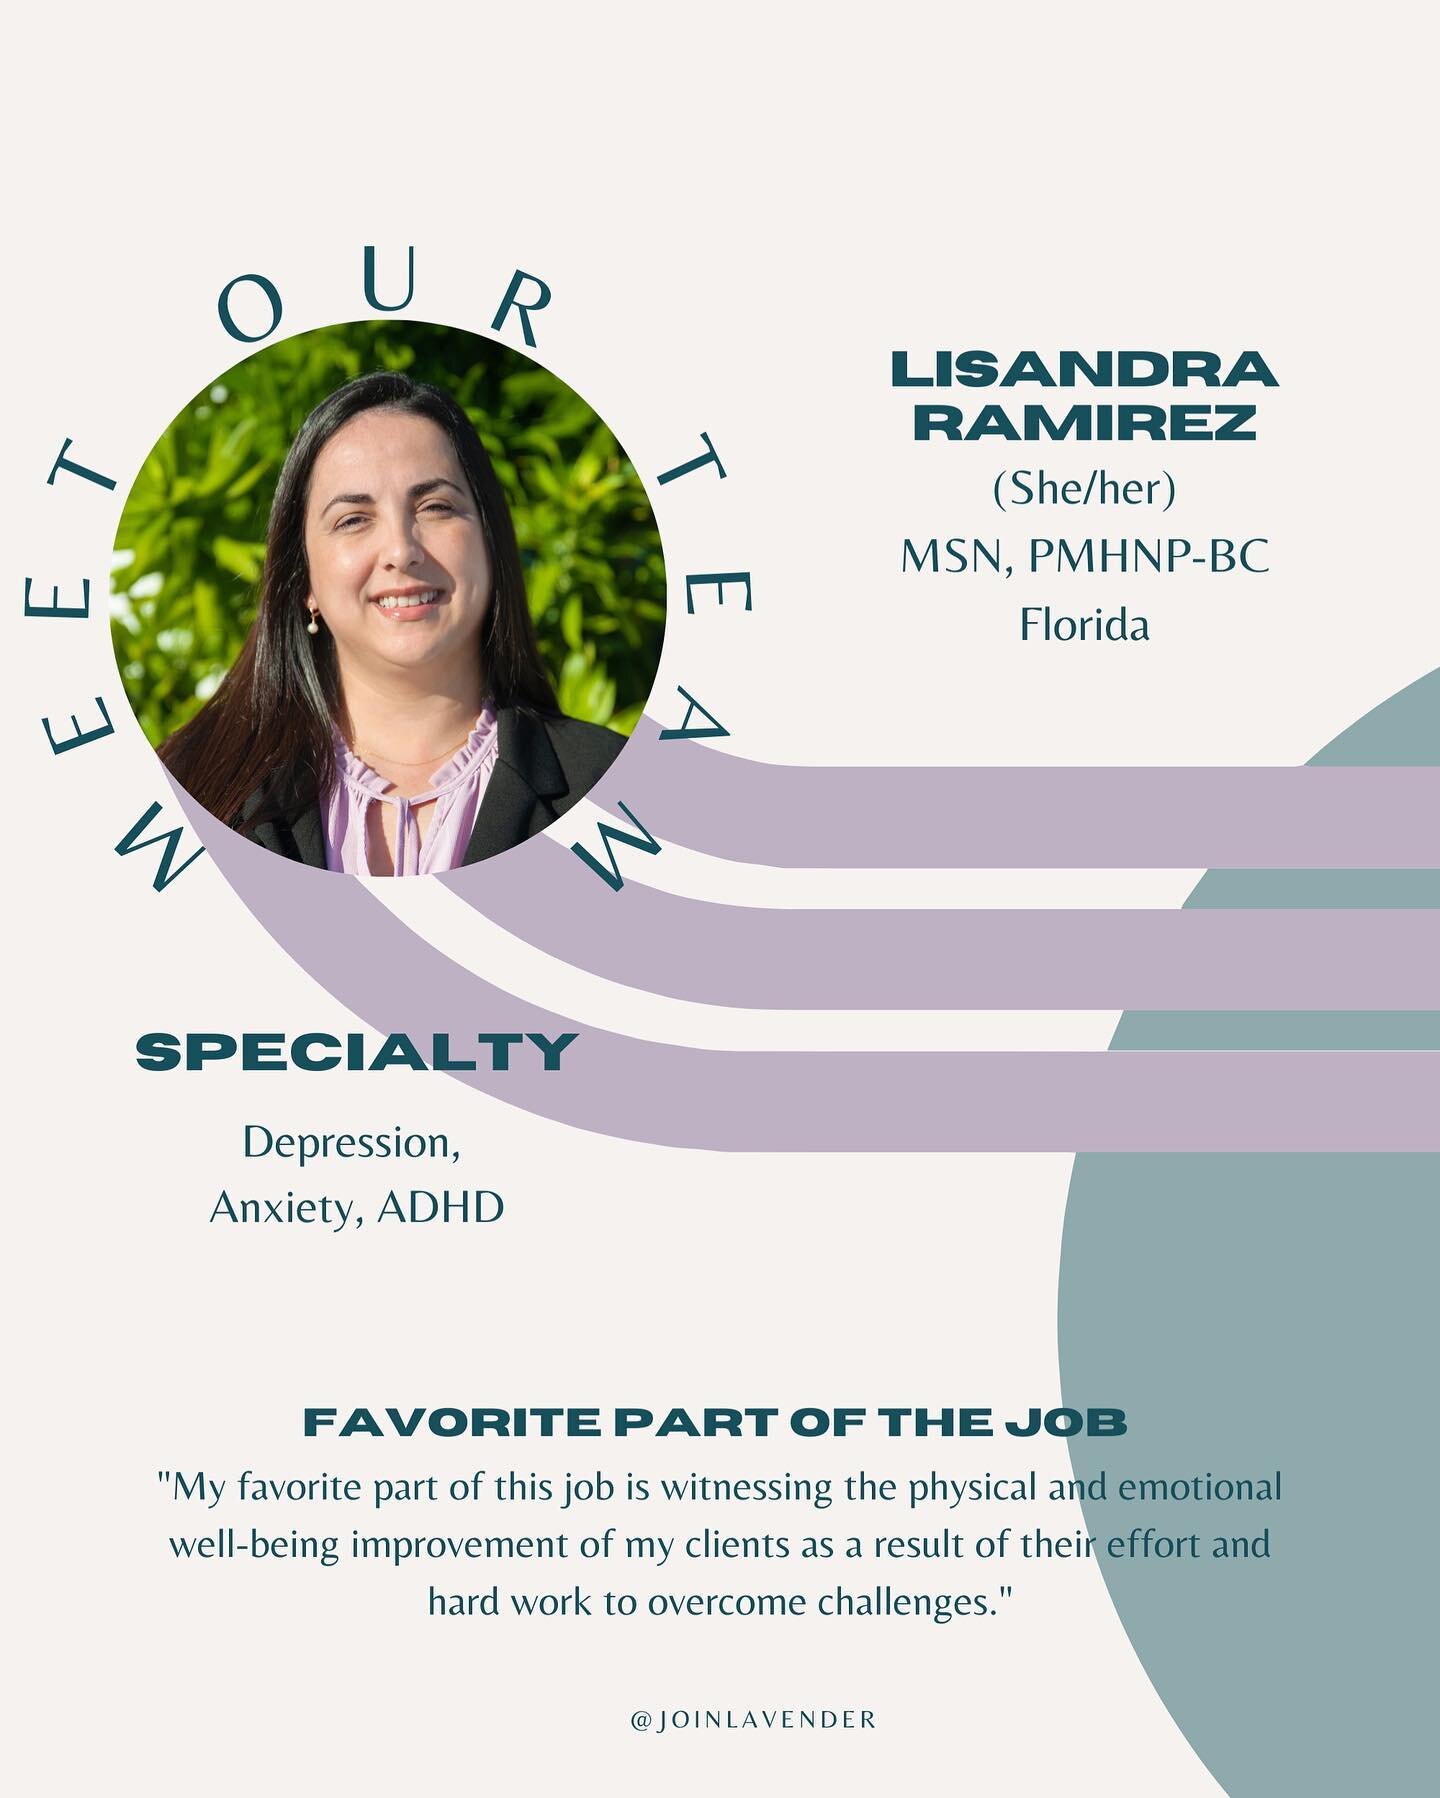 Sunshine state&mdash;we are accepting new clients! Meet Lisandra, one of our exceptional Florida NPs!